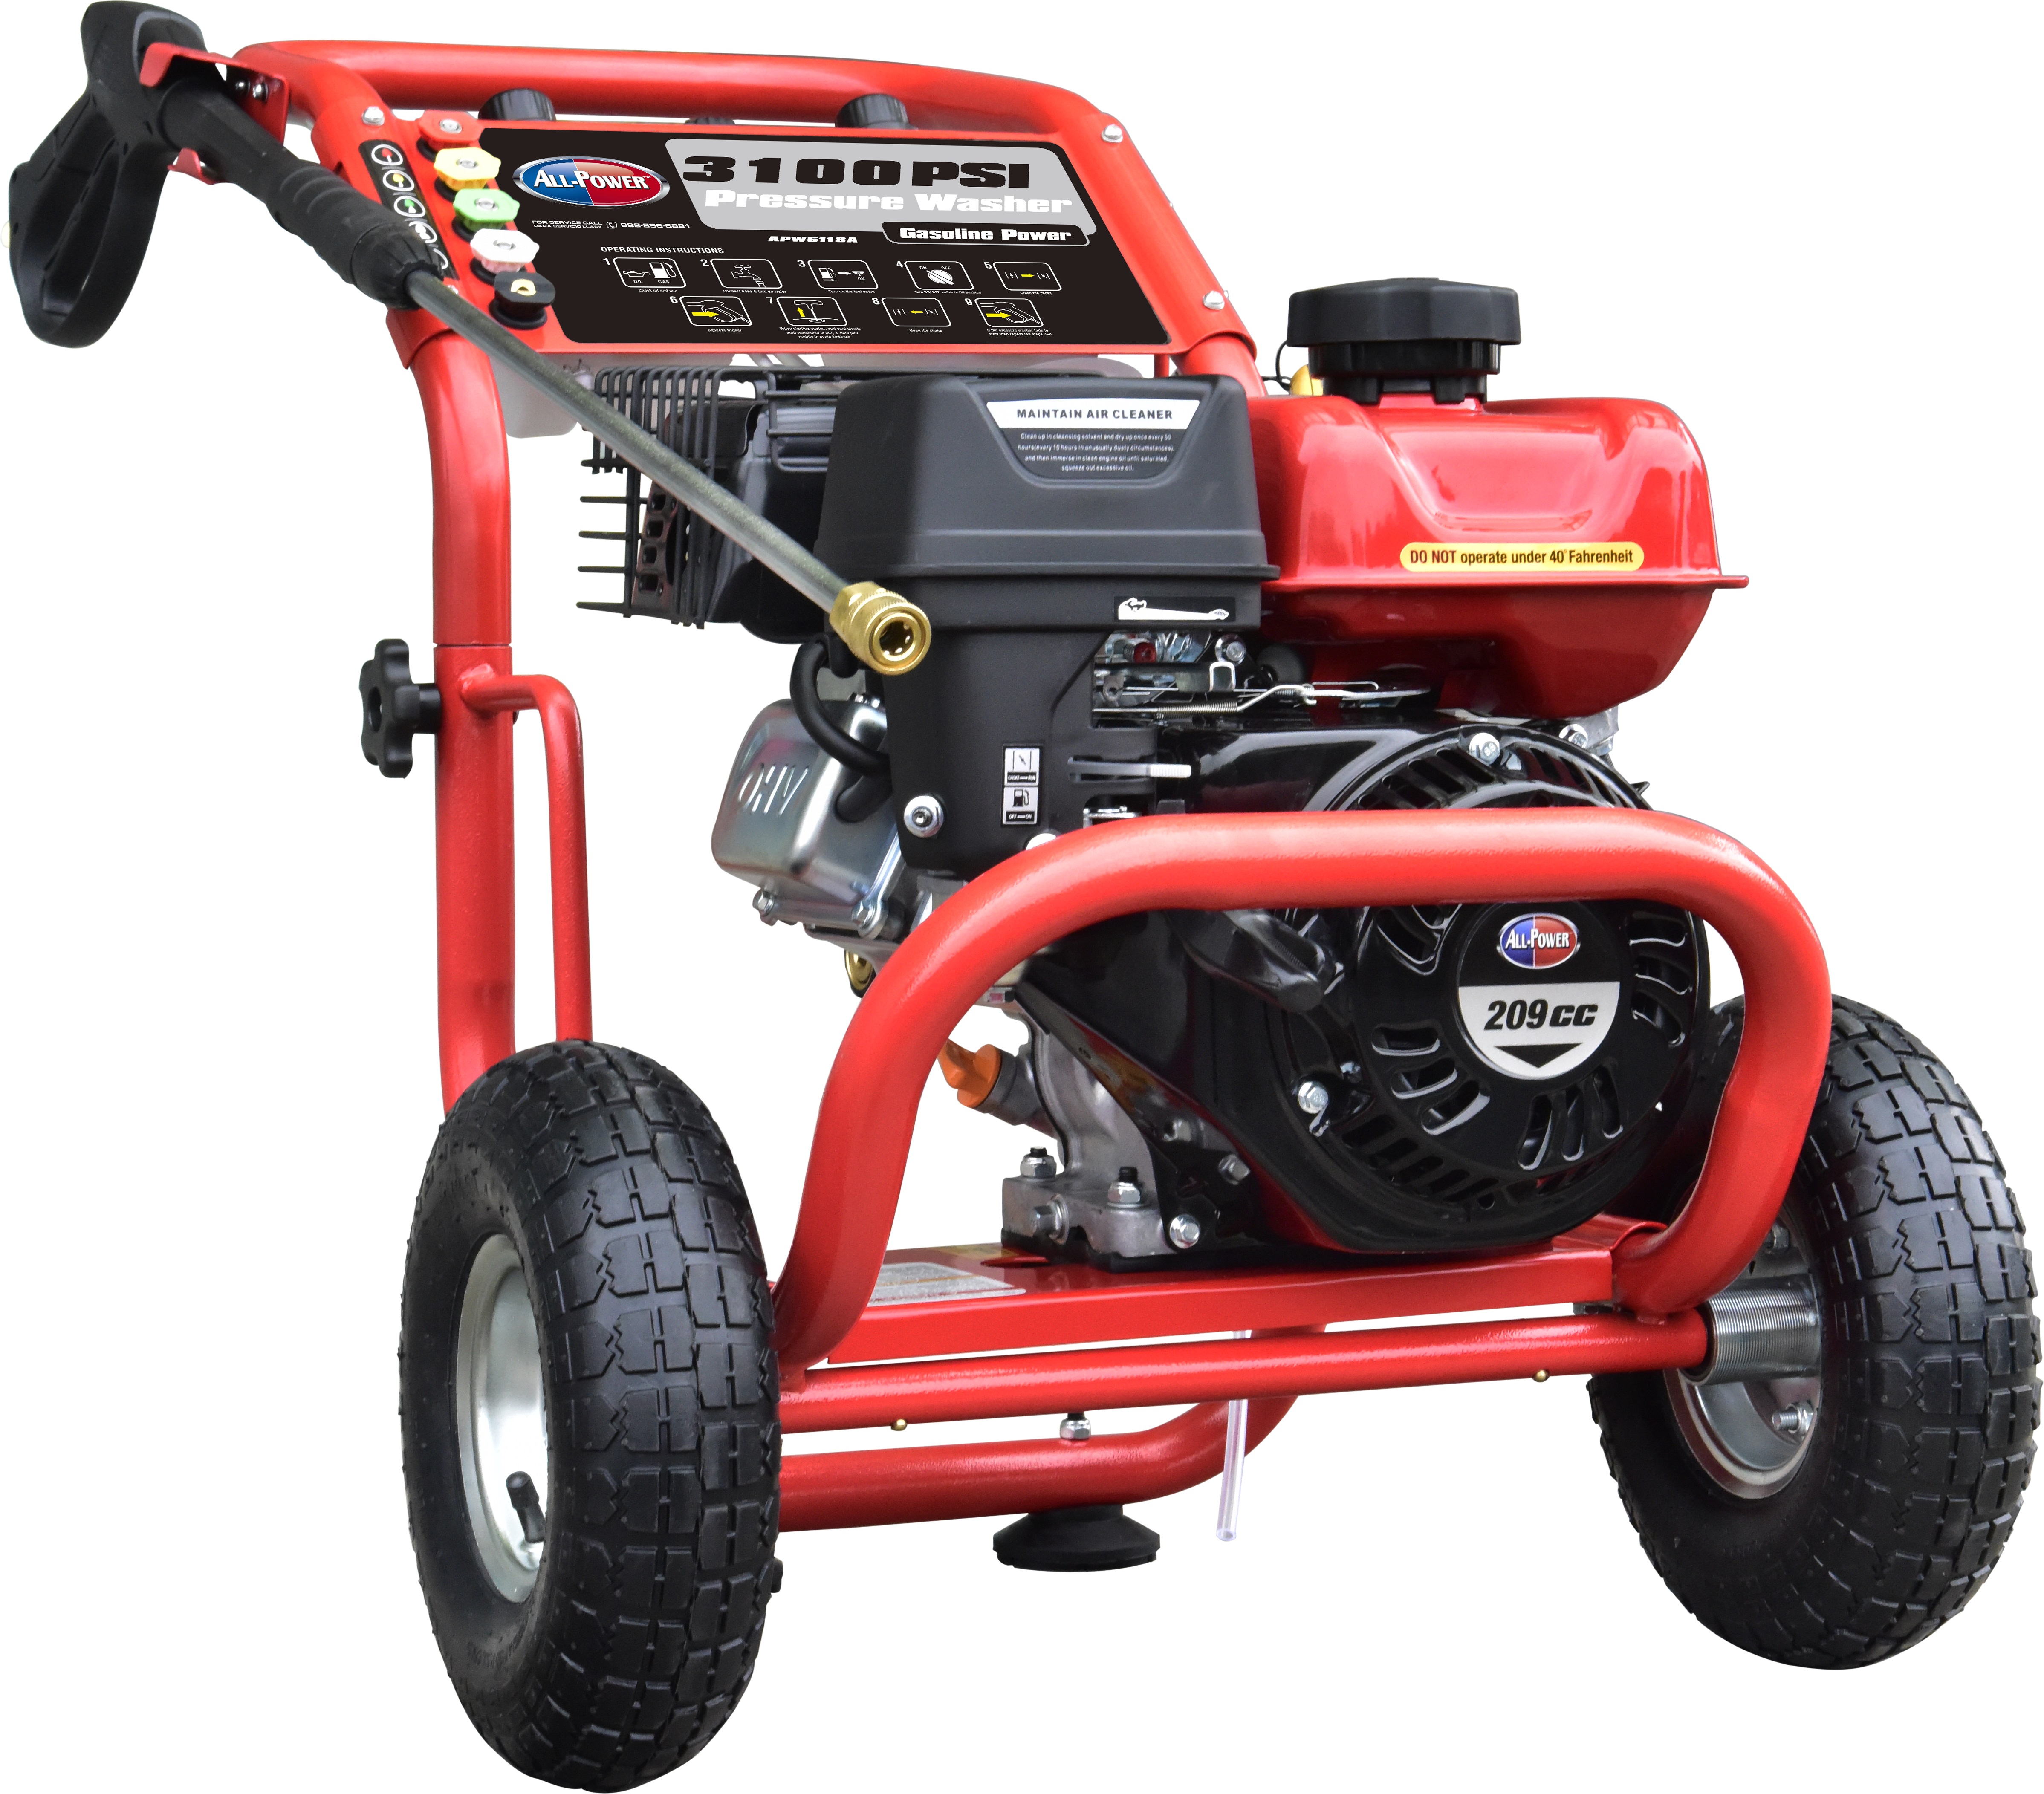 All Power America 3100 PSI, 2.6 GPM Gas Pressure Washer w/ 30 ft High Pressure Hose, C.A.R.B. Compliant, APW5118A - image 2 of 6